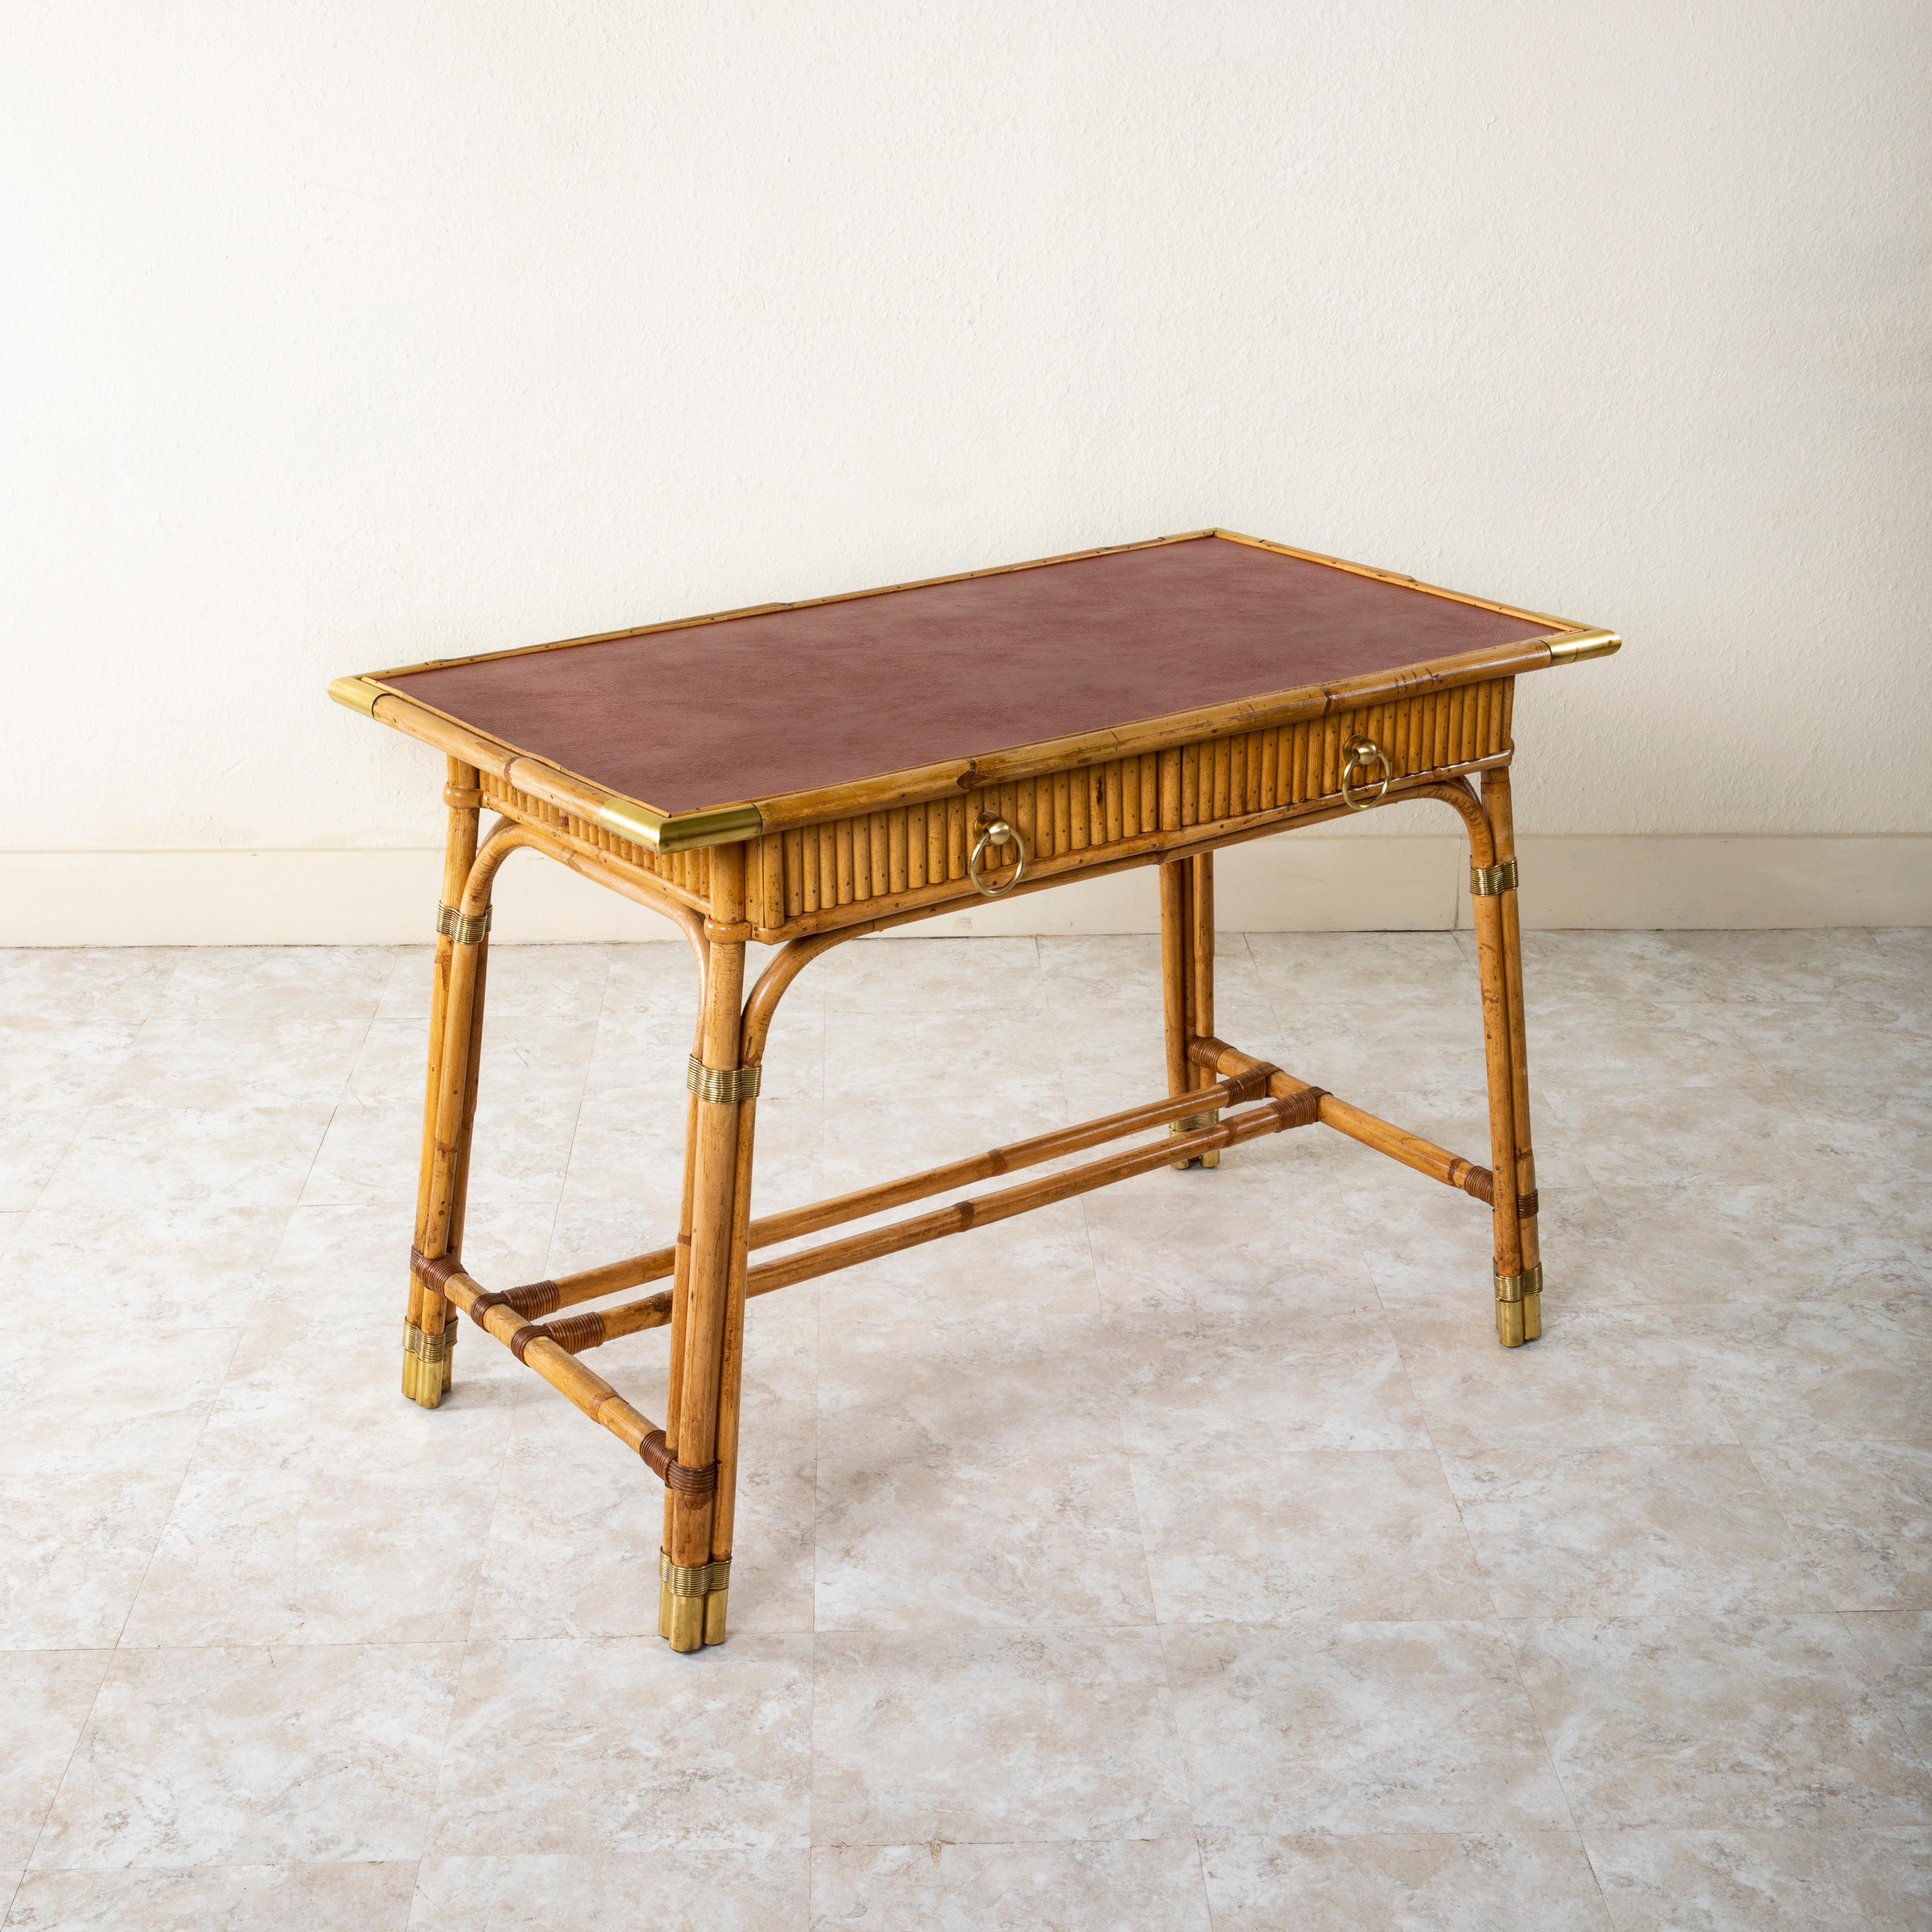 Attributed to Louis Sognot (1892-1970), designer for Maison Jansen, this mid twentieth century French desk or writing table, is constructed of bamboo and features a red leather top. The corners around the top and legs are all detailed in brass. Its